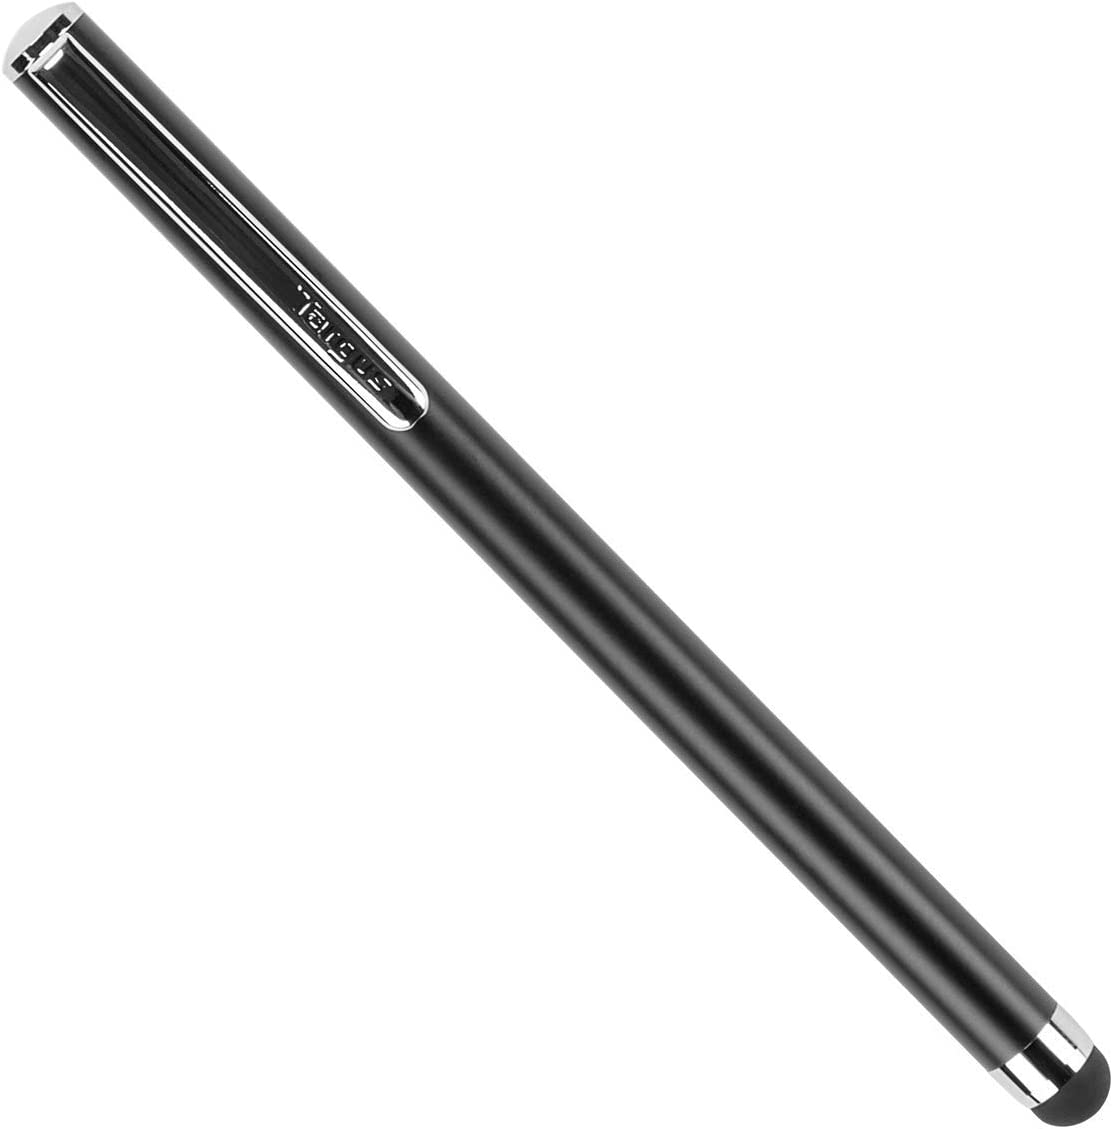 Targus Stylus Pen for Tablets, iPad, Smartphones and ALL Touchscreen devices with Slim Durable Rubber Tip, Black (AMM01TBUS)